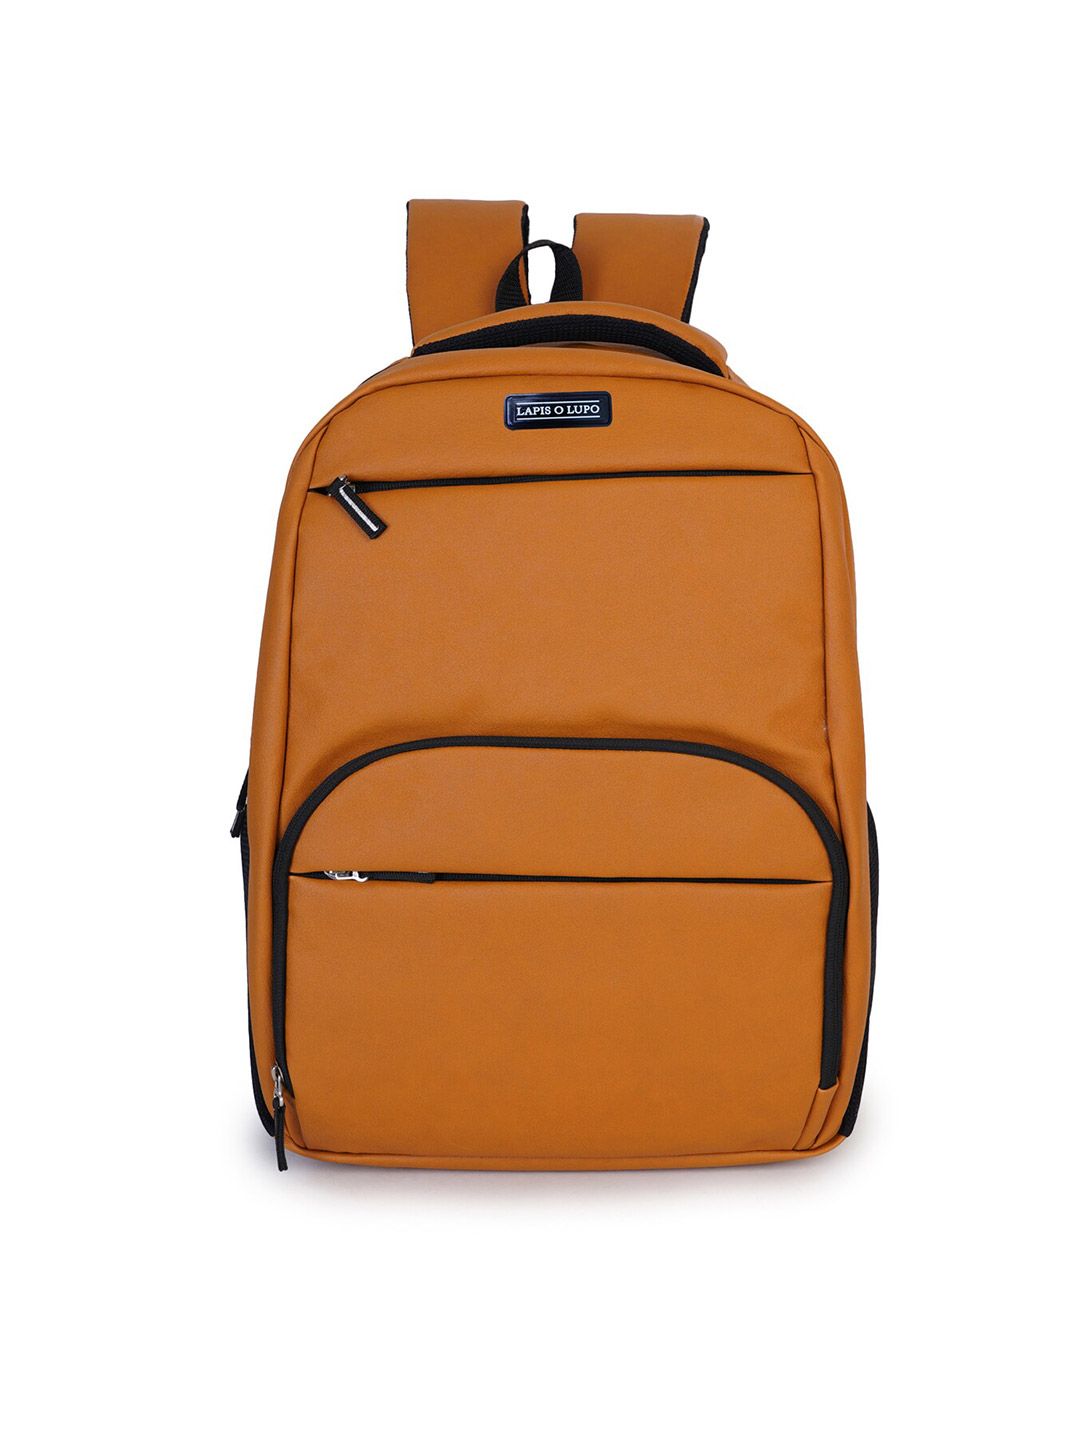 Lapis O Lupo Mustard Backpack Price in India